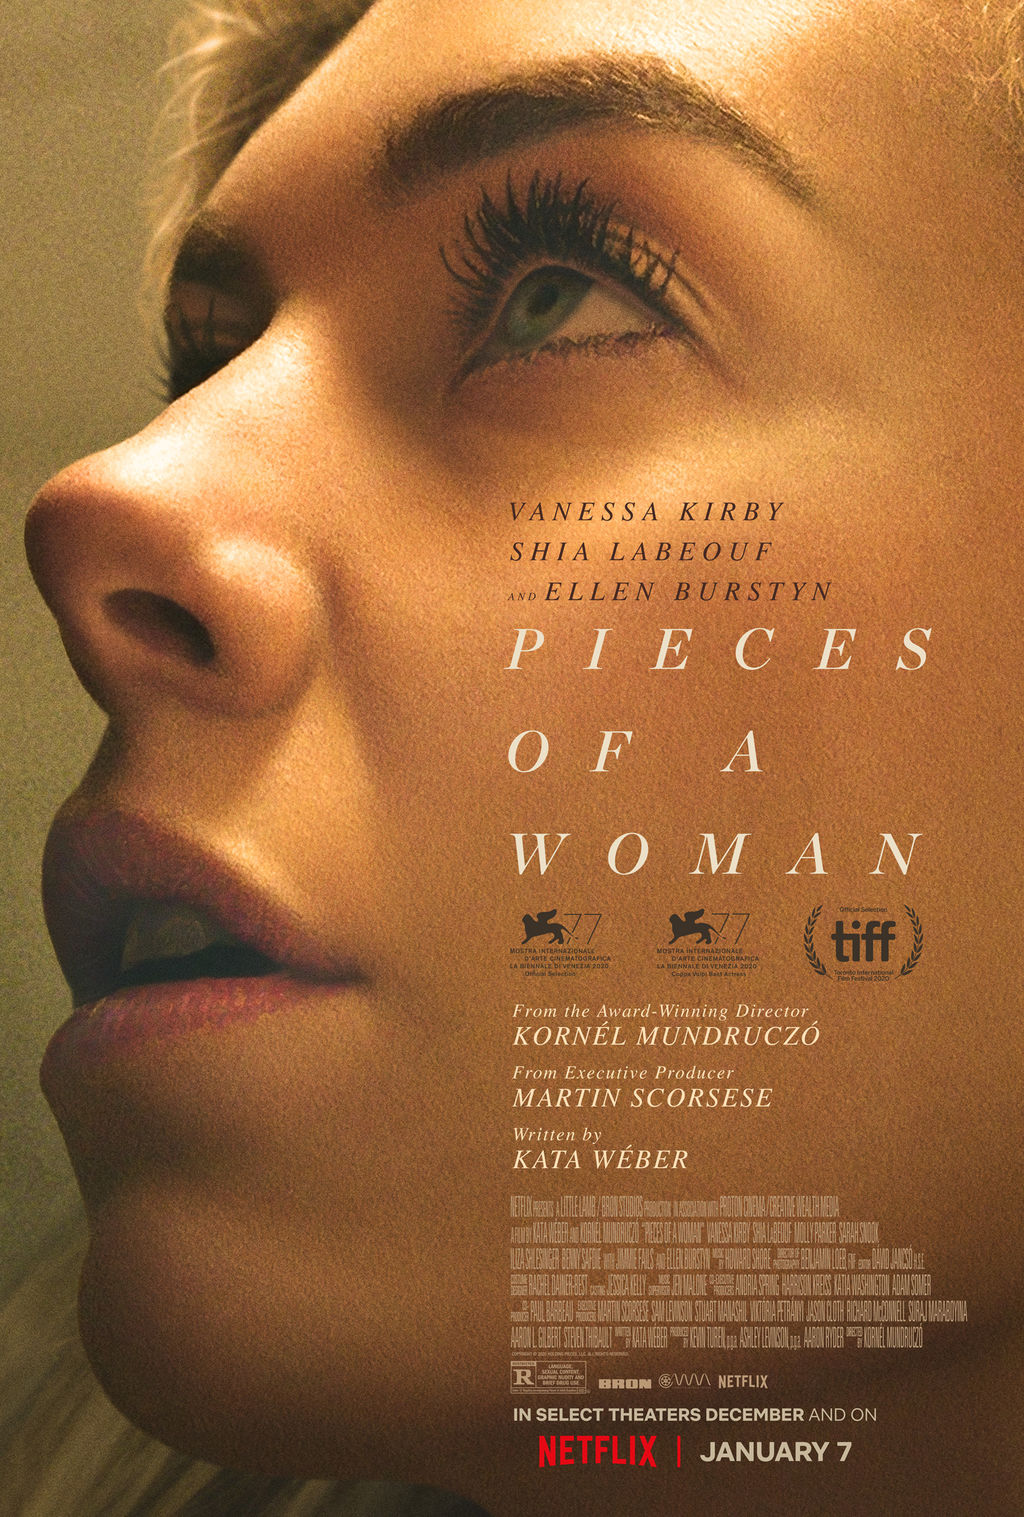 5. Pieces of a Woman (2020)